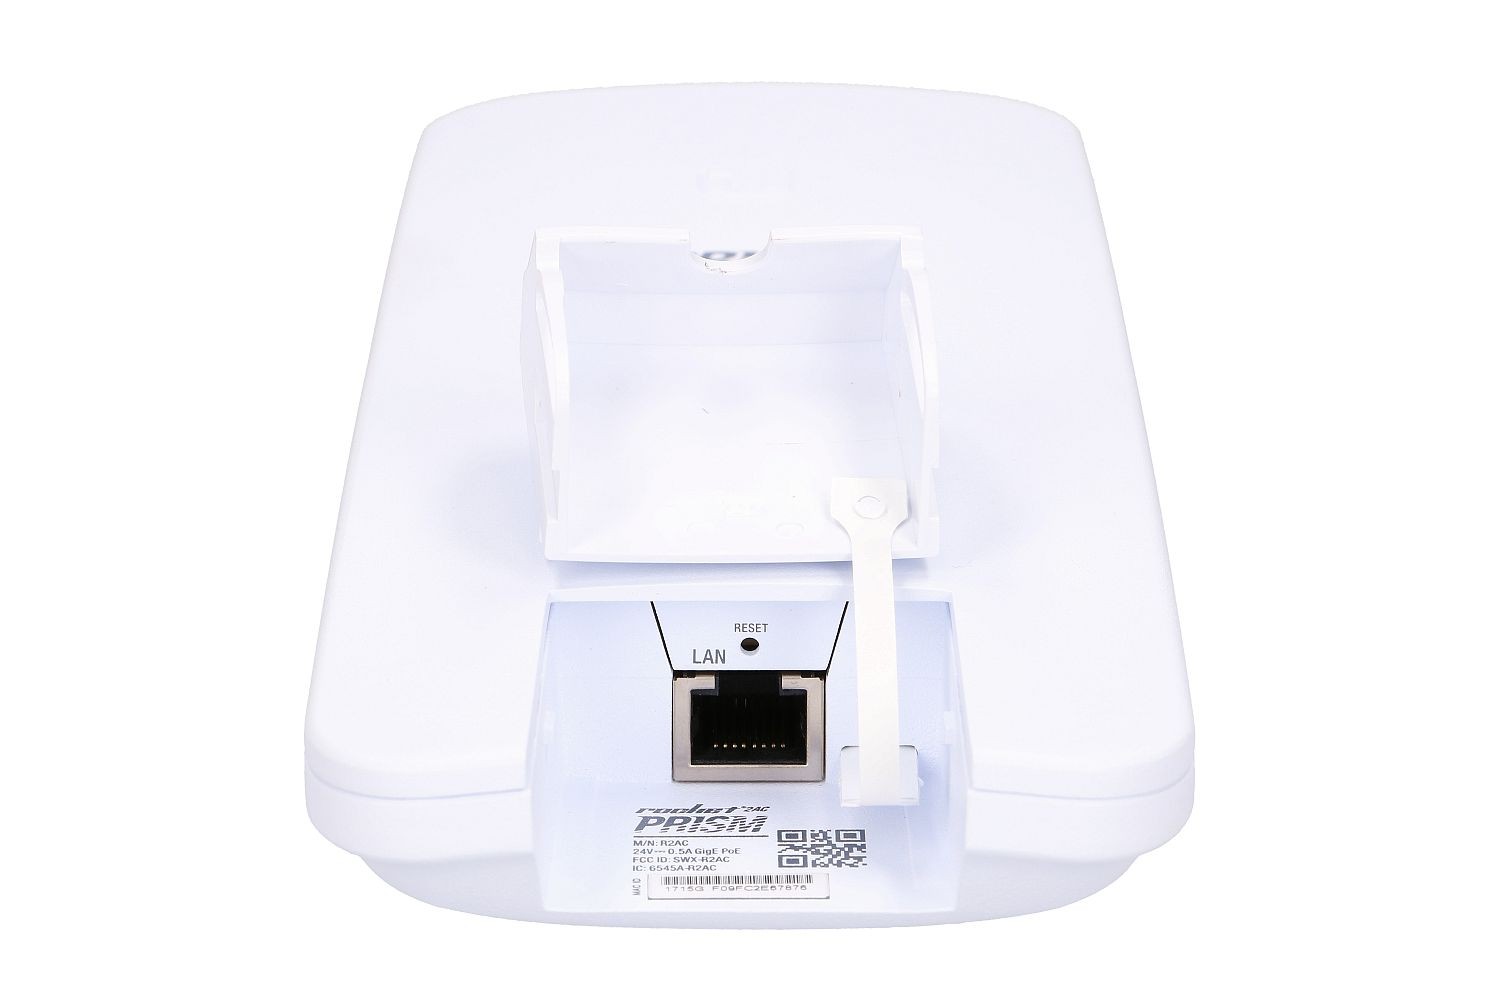 Ubiquiti Rocket AC Prism 2GHz AirMax AC BaseStation up to330+ Mbps